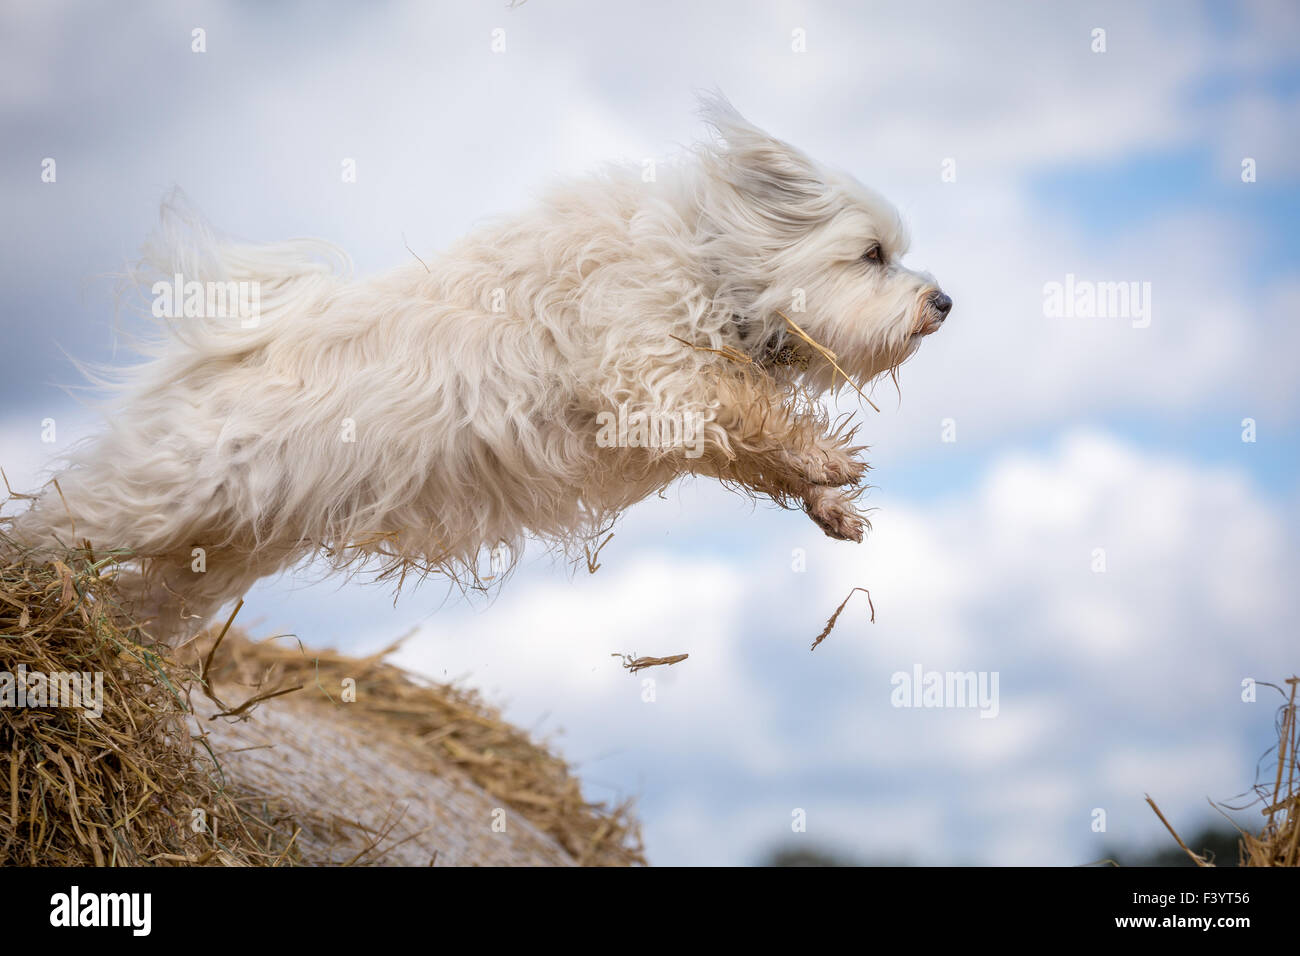 A dog wants to fly Stock Photo